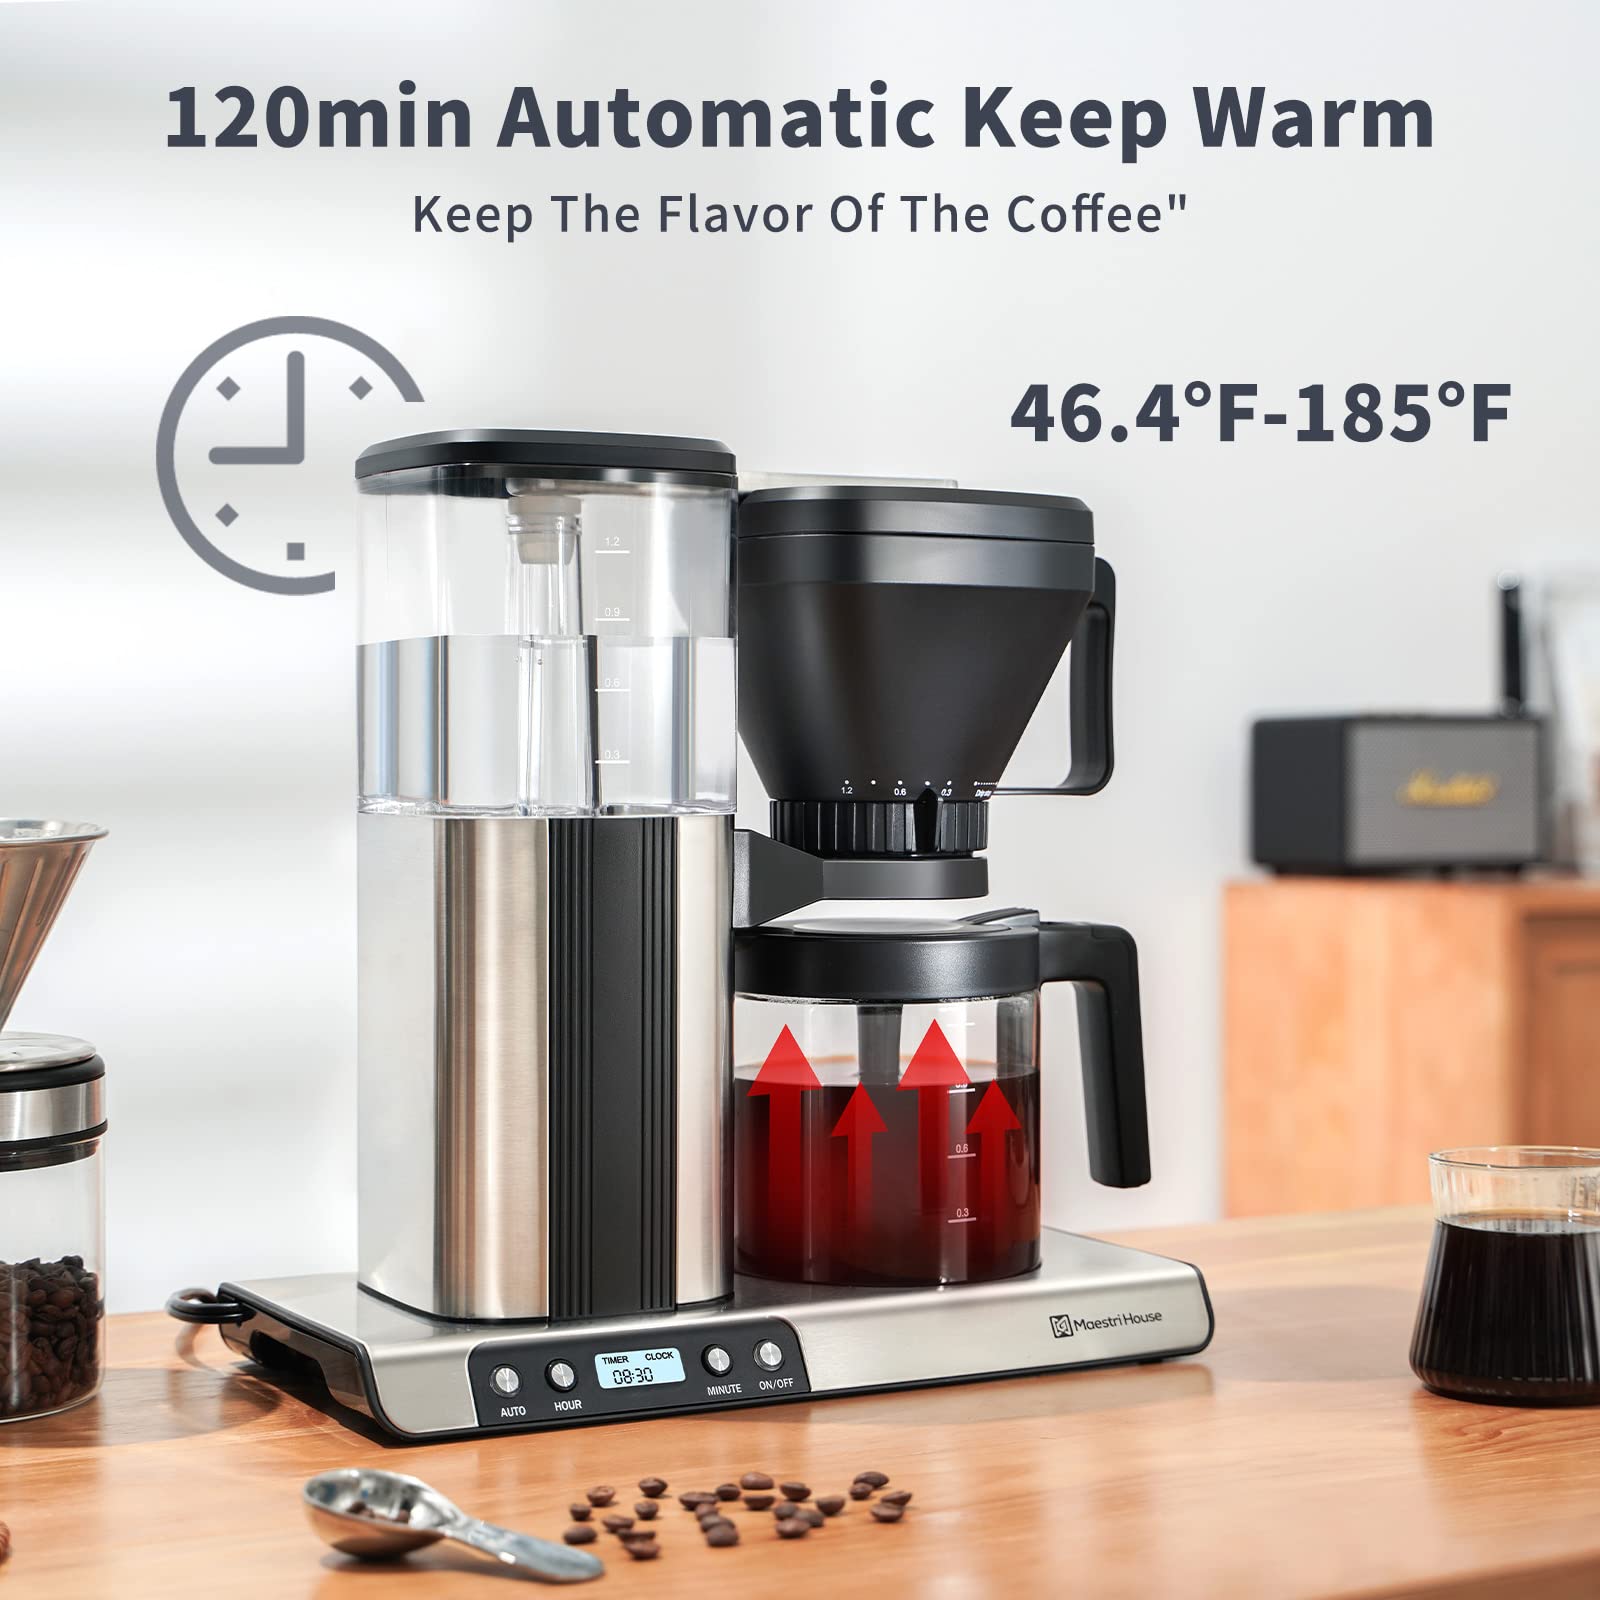 Maestri House Coffee Maker, 8-Cup Drip Coffee Machine with Stainless Steel, One-Touch Brewing and Adjustable Strength, Automatic Start, Glass Carafe and Keep Warm Plate, 1.2L Large Capacity Water Tank